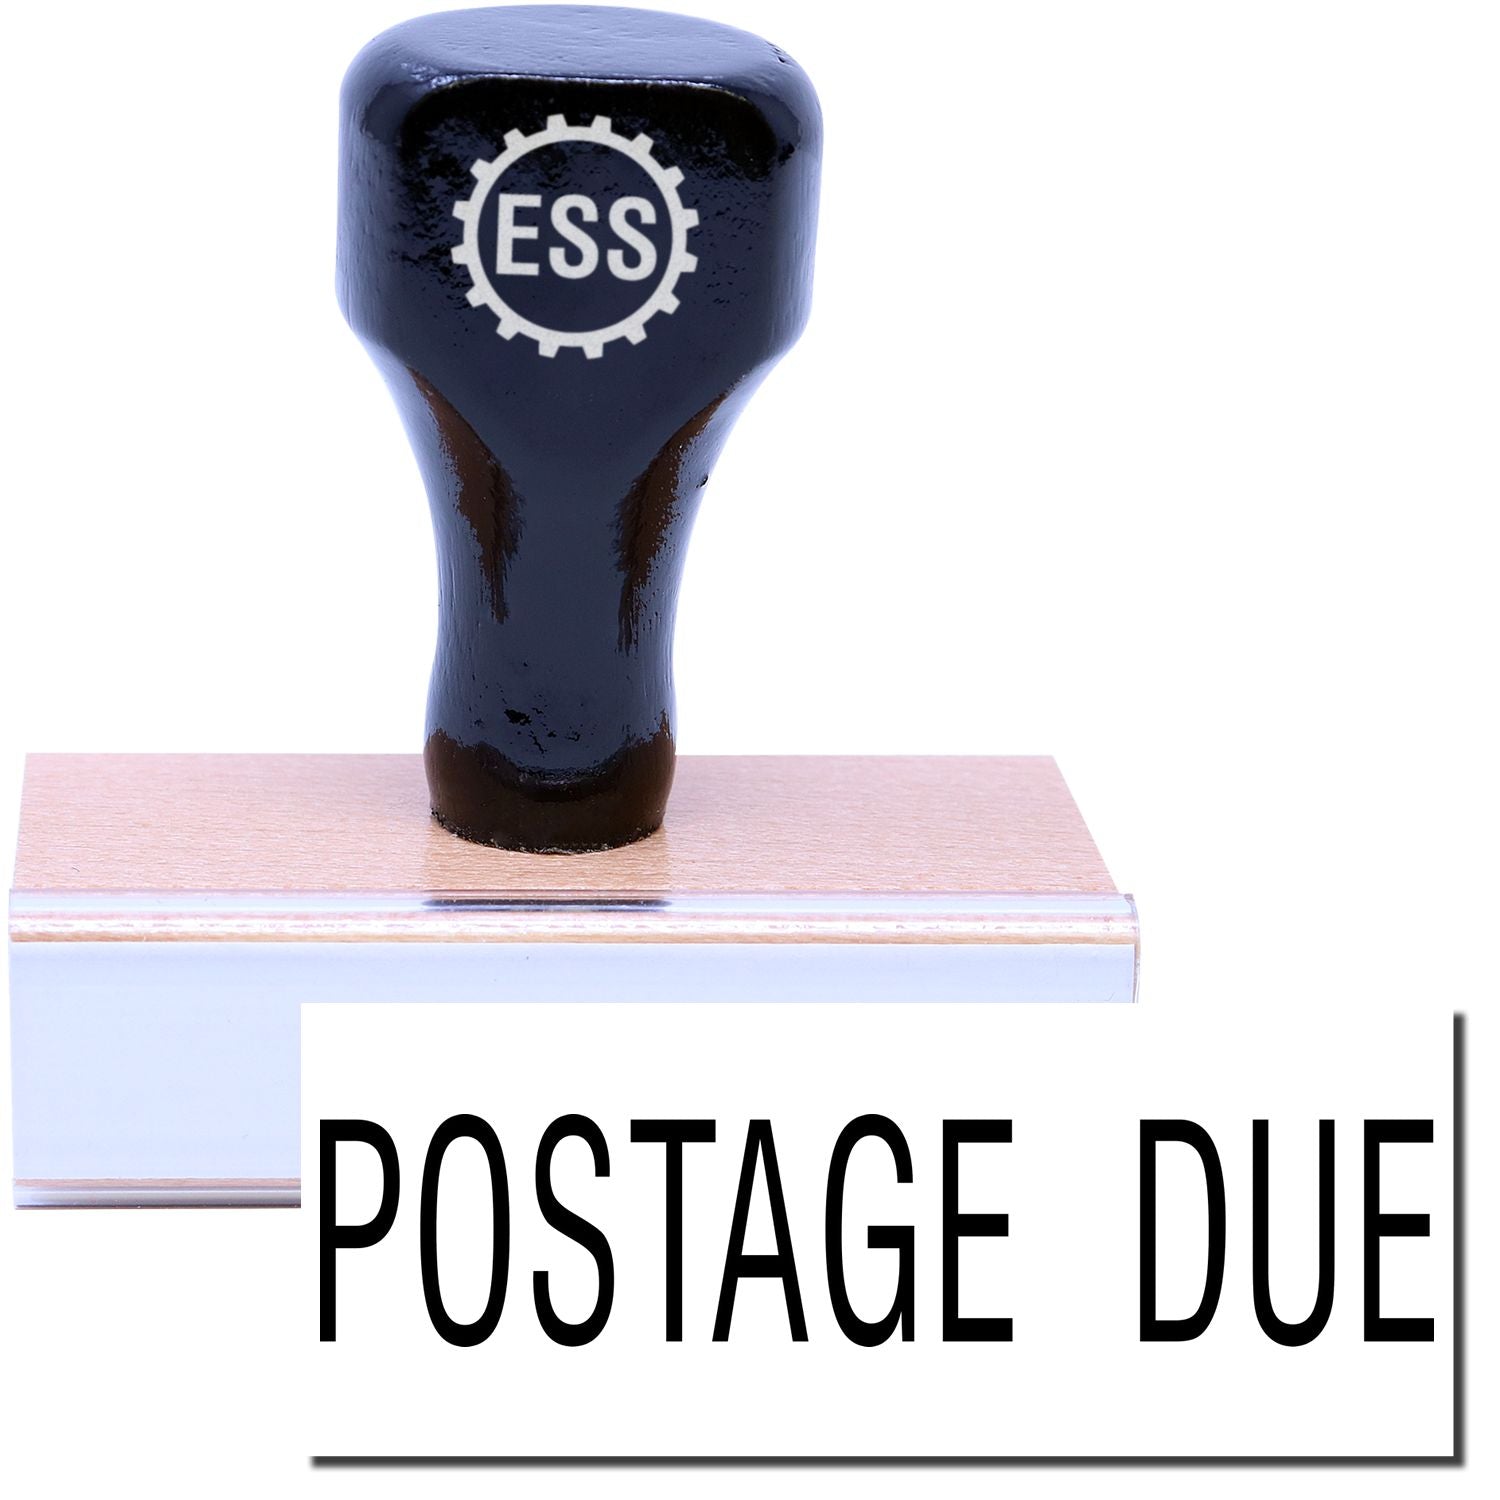 A stock office rubber stamp with a stamped image showing how the text "POSTAGE DUE" in a large font is displayed after stamping.